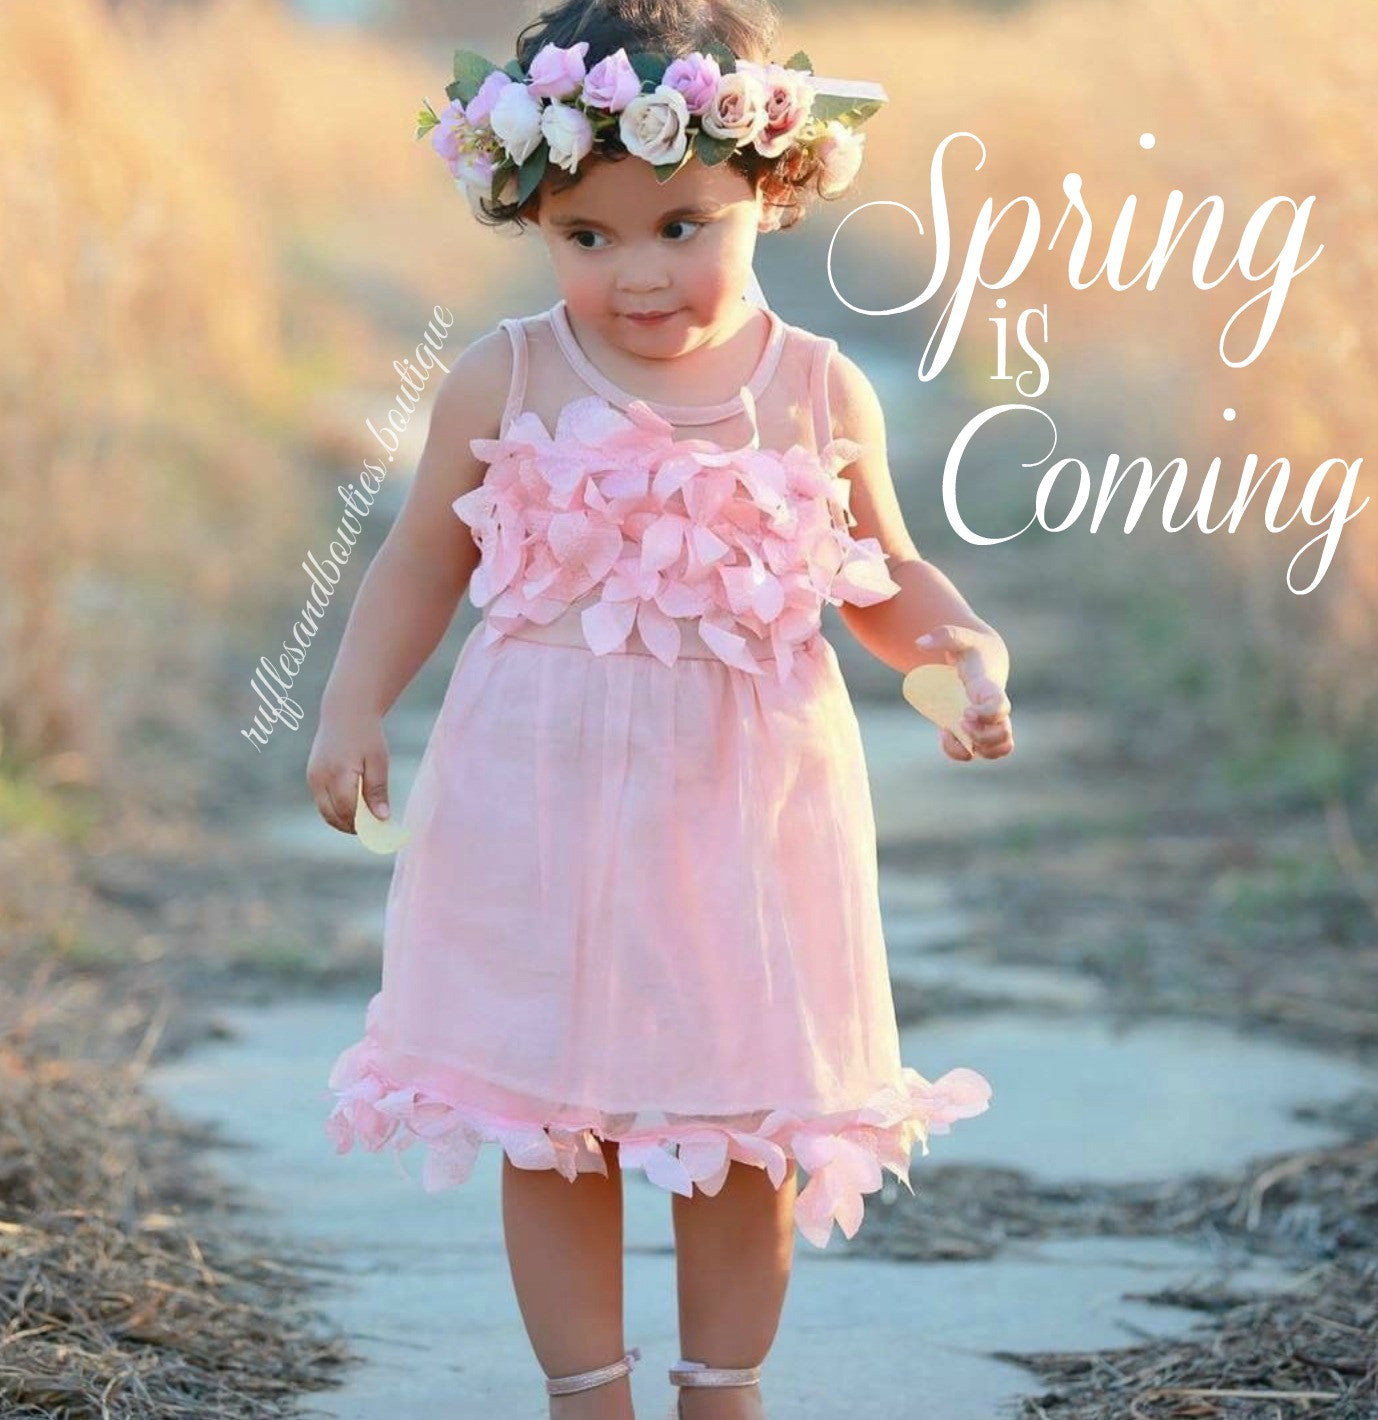 2017 Spring Trends and Updates for your Little One’s Wardrobe